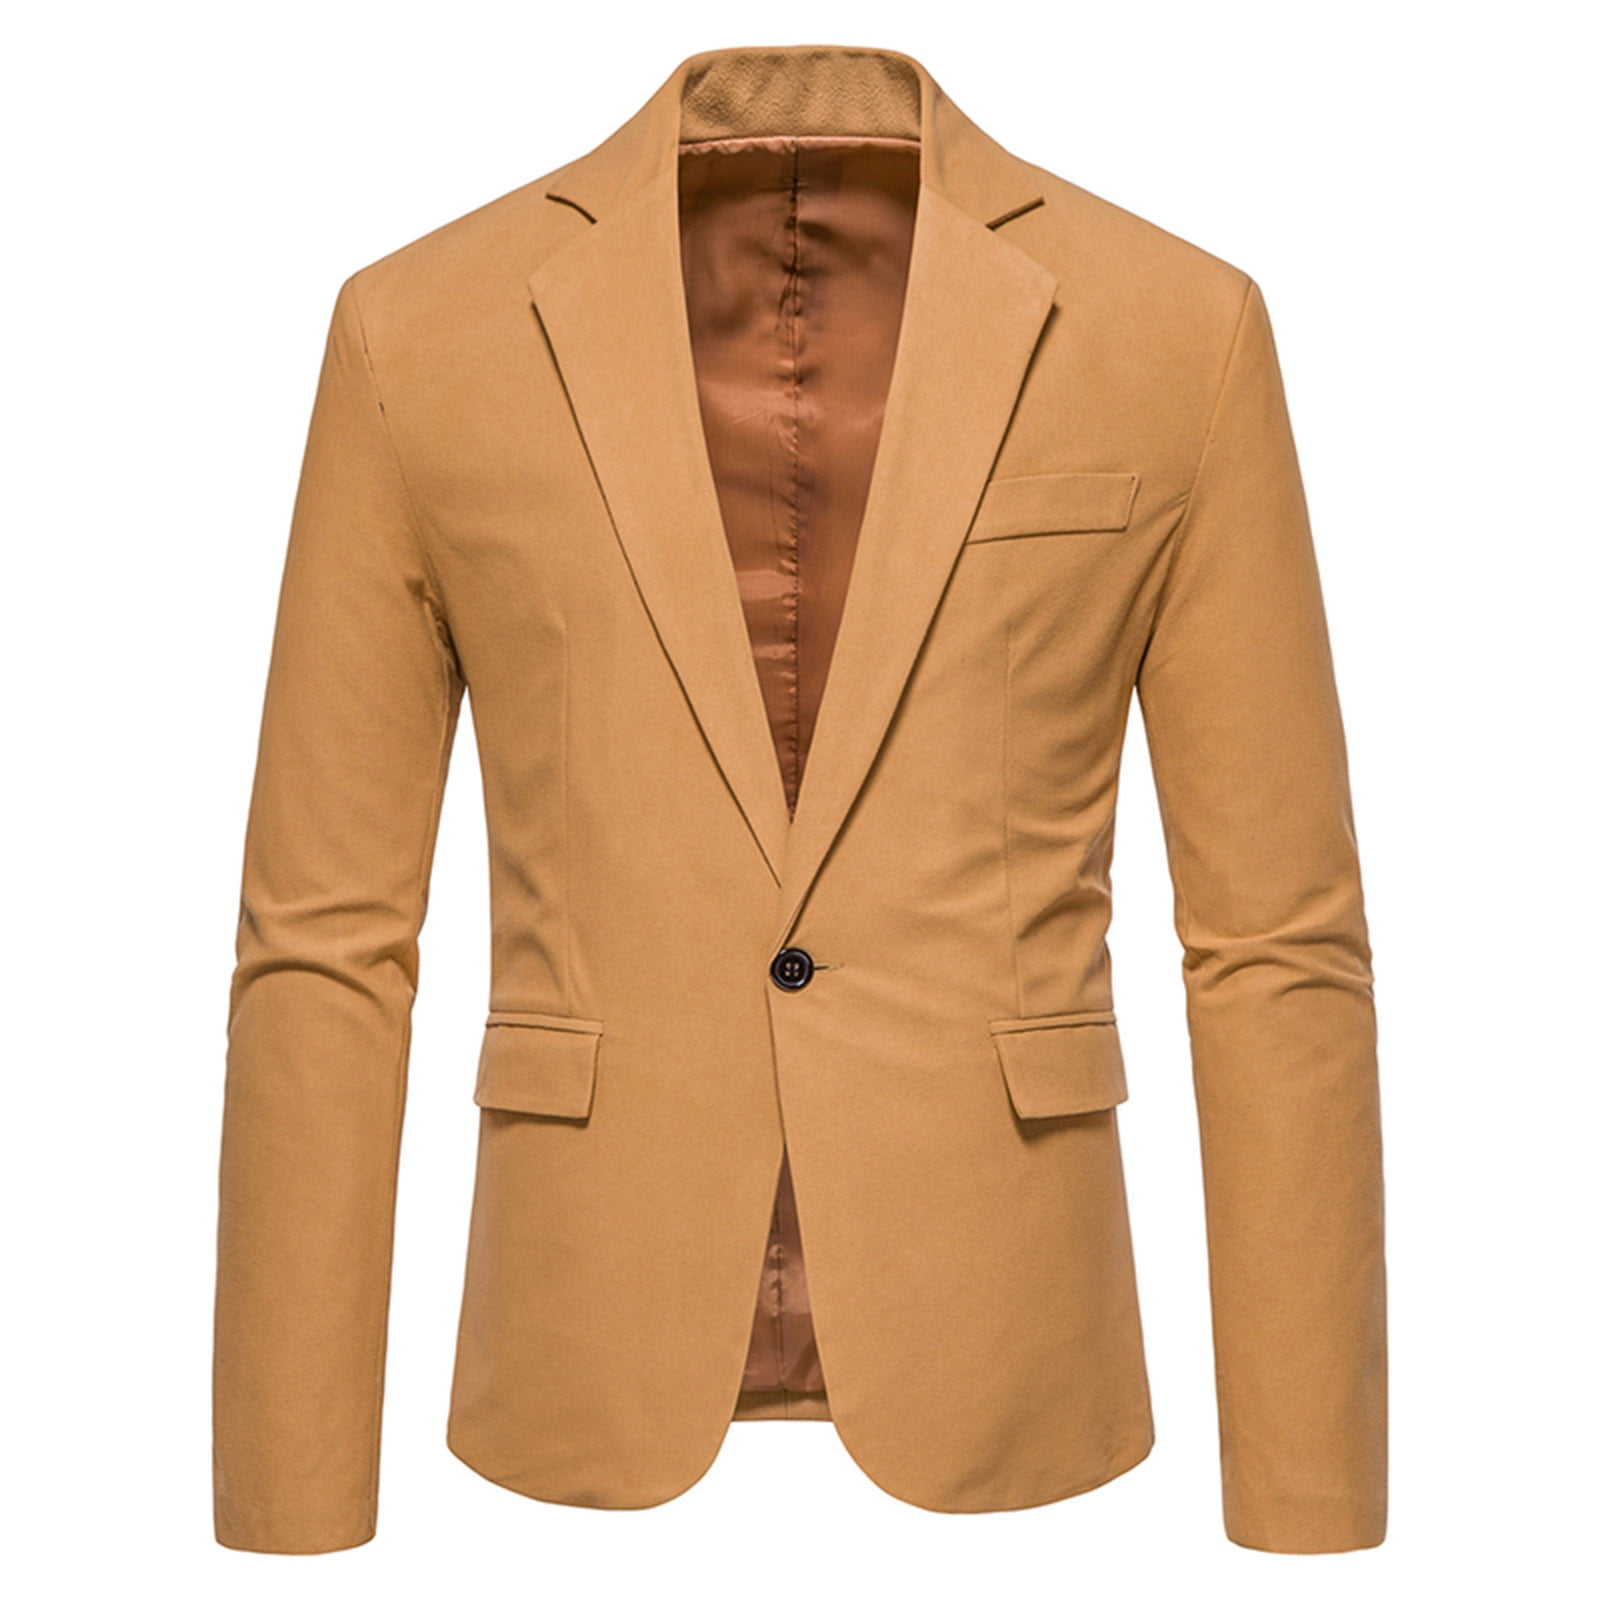 Zodggu Blazers Suit for Men Long Sleeve Tuxedo Slim Fit Solid Sports  Business Pocket Office Lightweight Lapel Collar Jacket One Button Front  Stretch Suit Coat Prom Wedding Yellow 12 